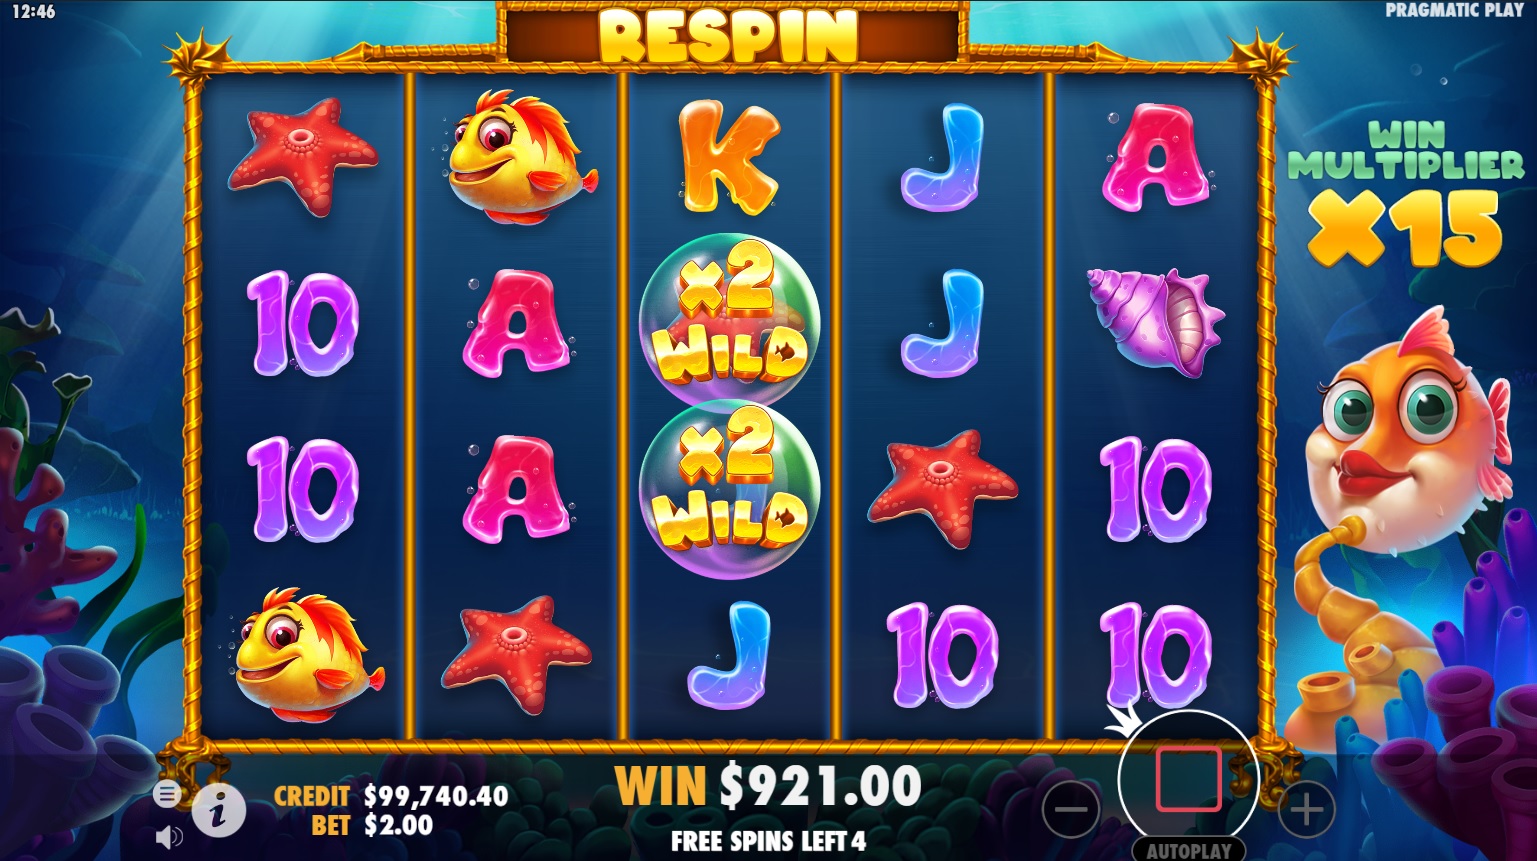 Free spins feature